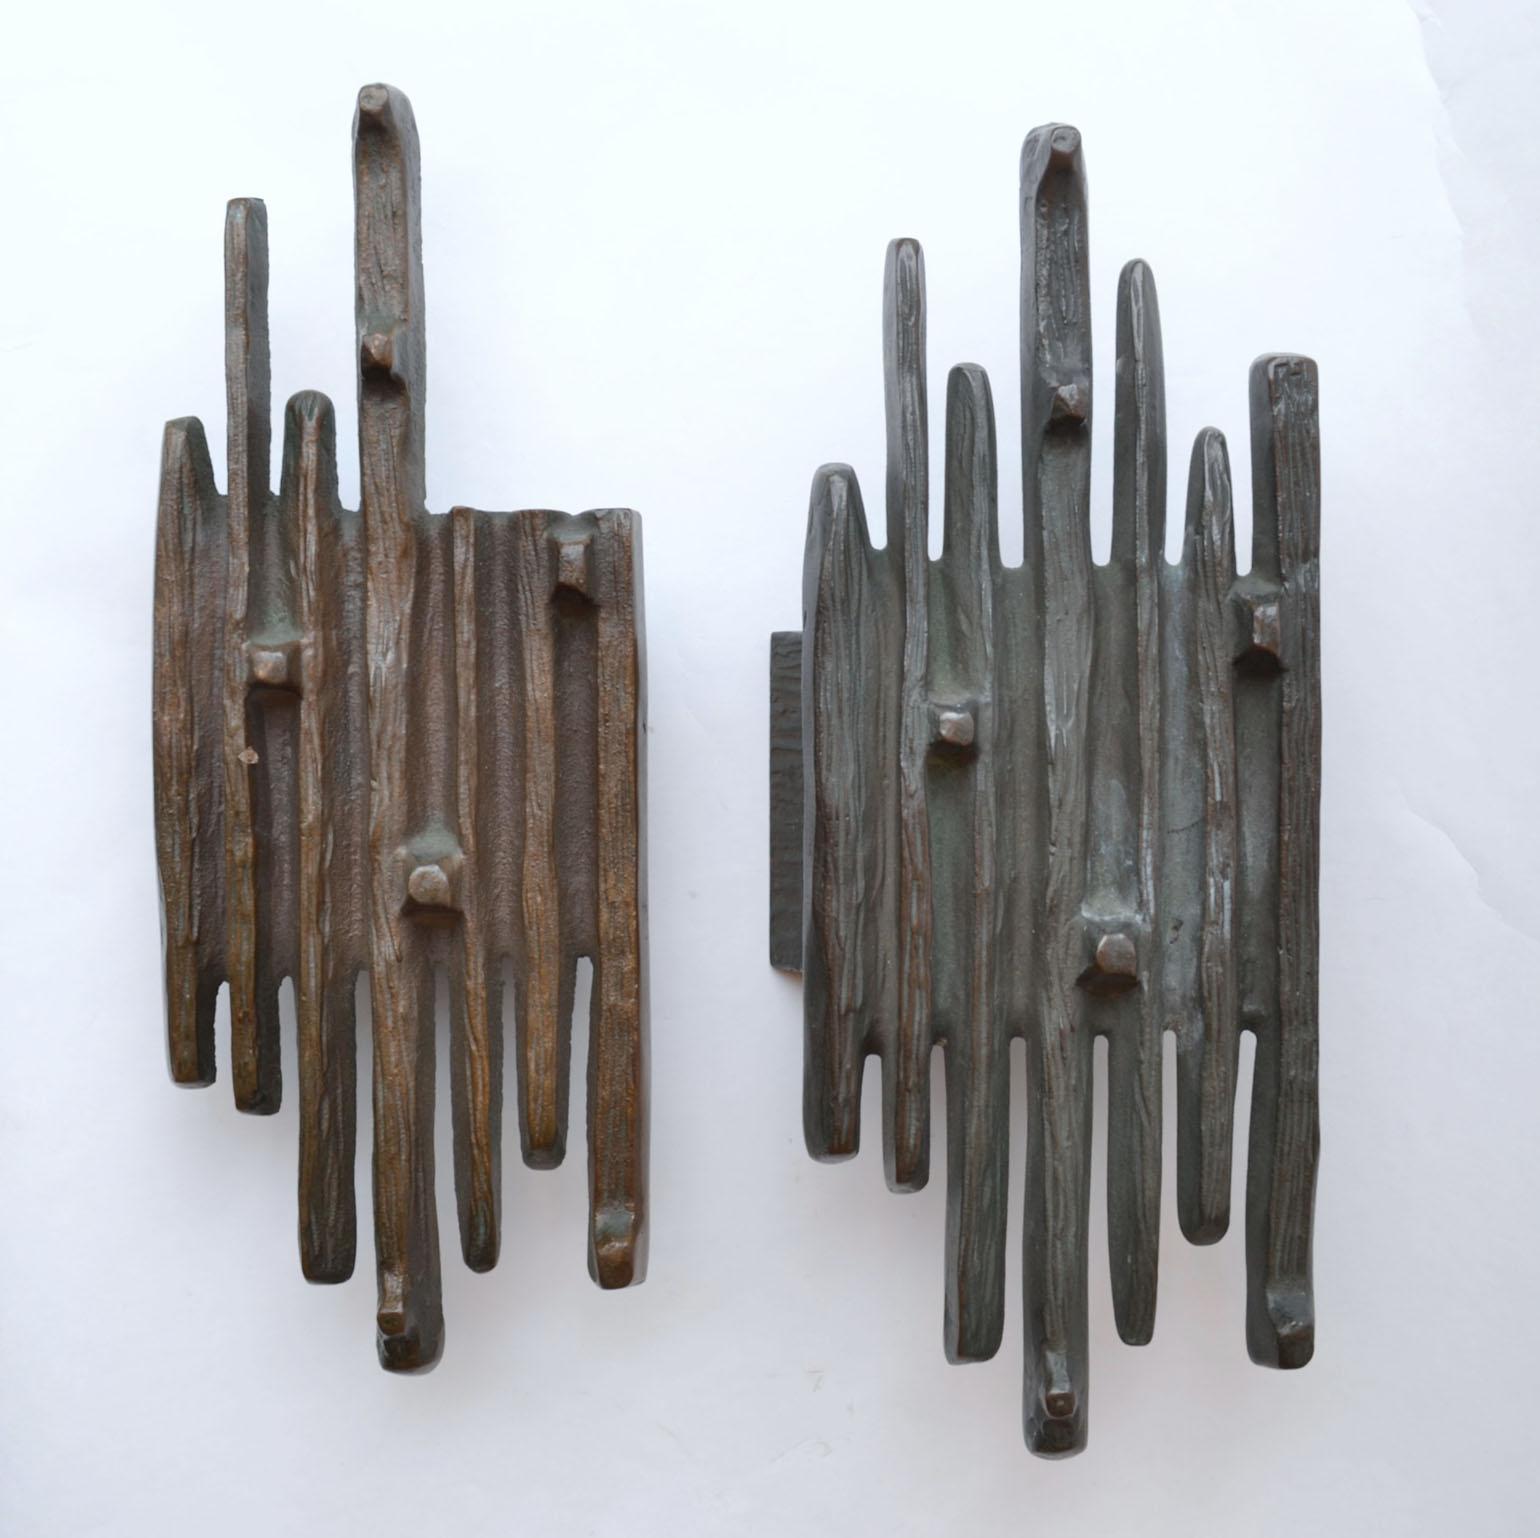 Two nearly identical extremely Brutalist push and pull bronze cast door handles for double doors or a single door on both sides.
These door handles were designed in the 1970s for front doors. They are multipurpose and can be used in- or outside on